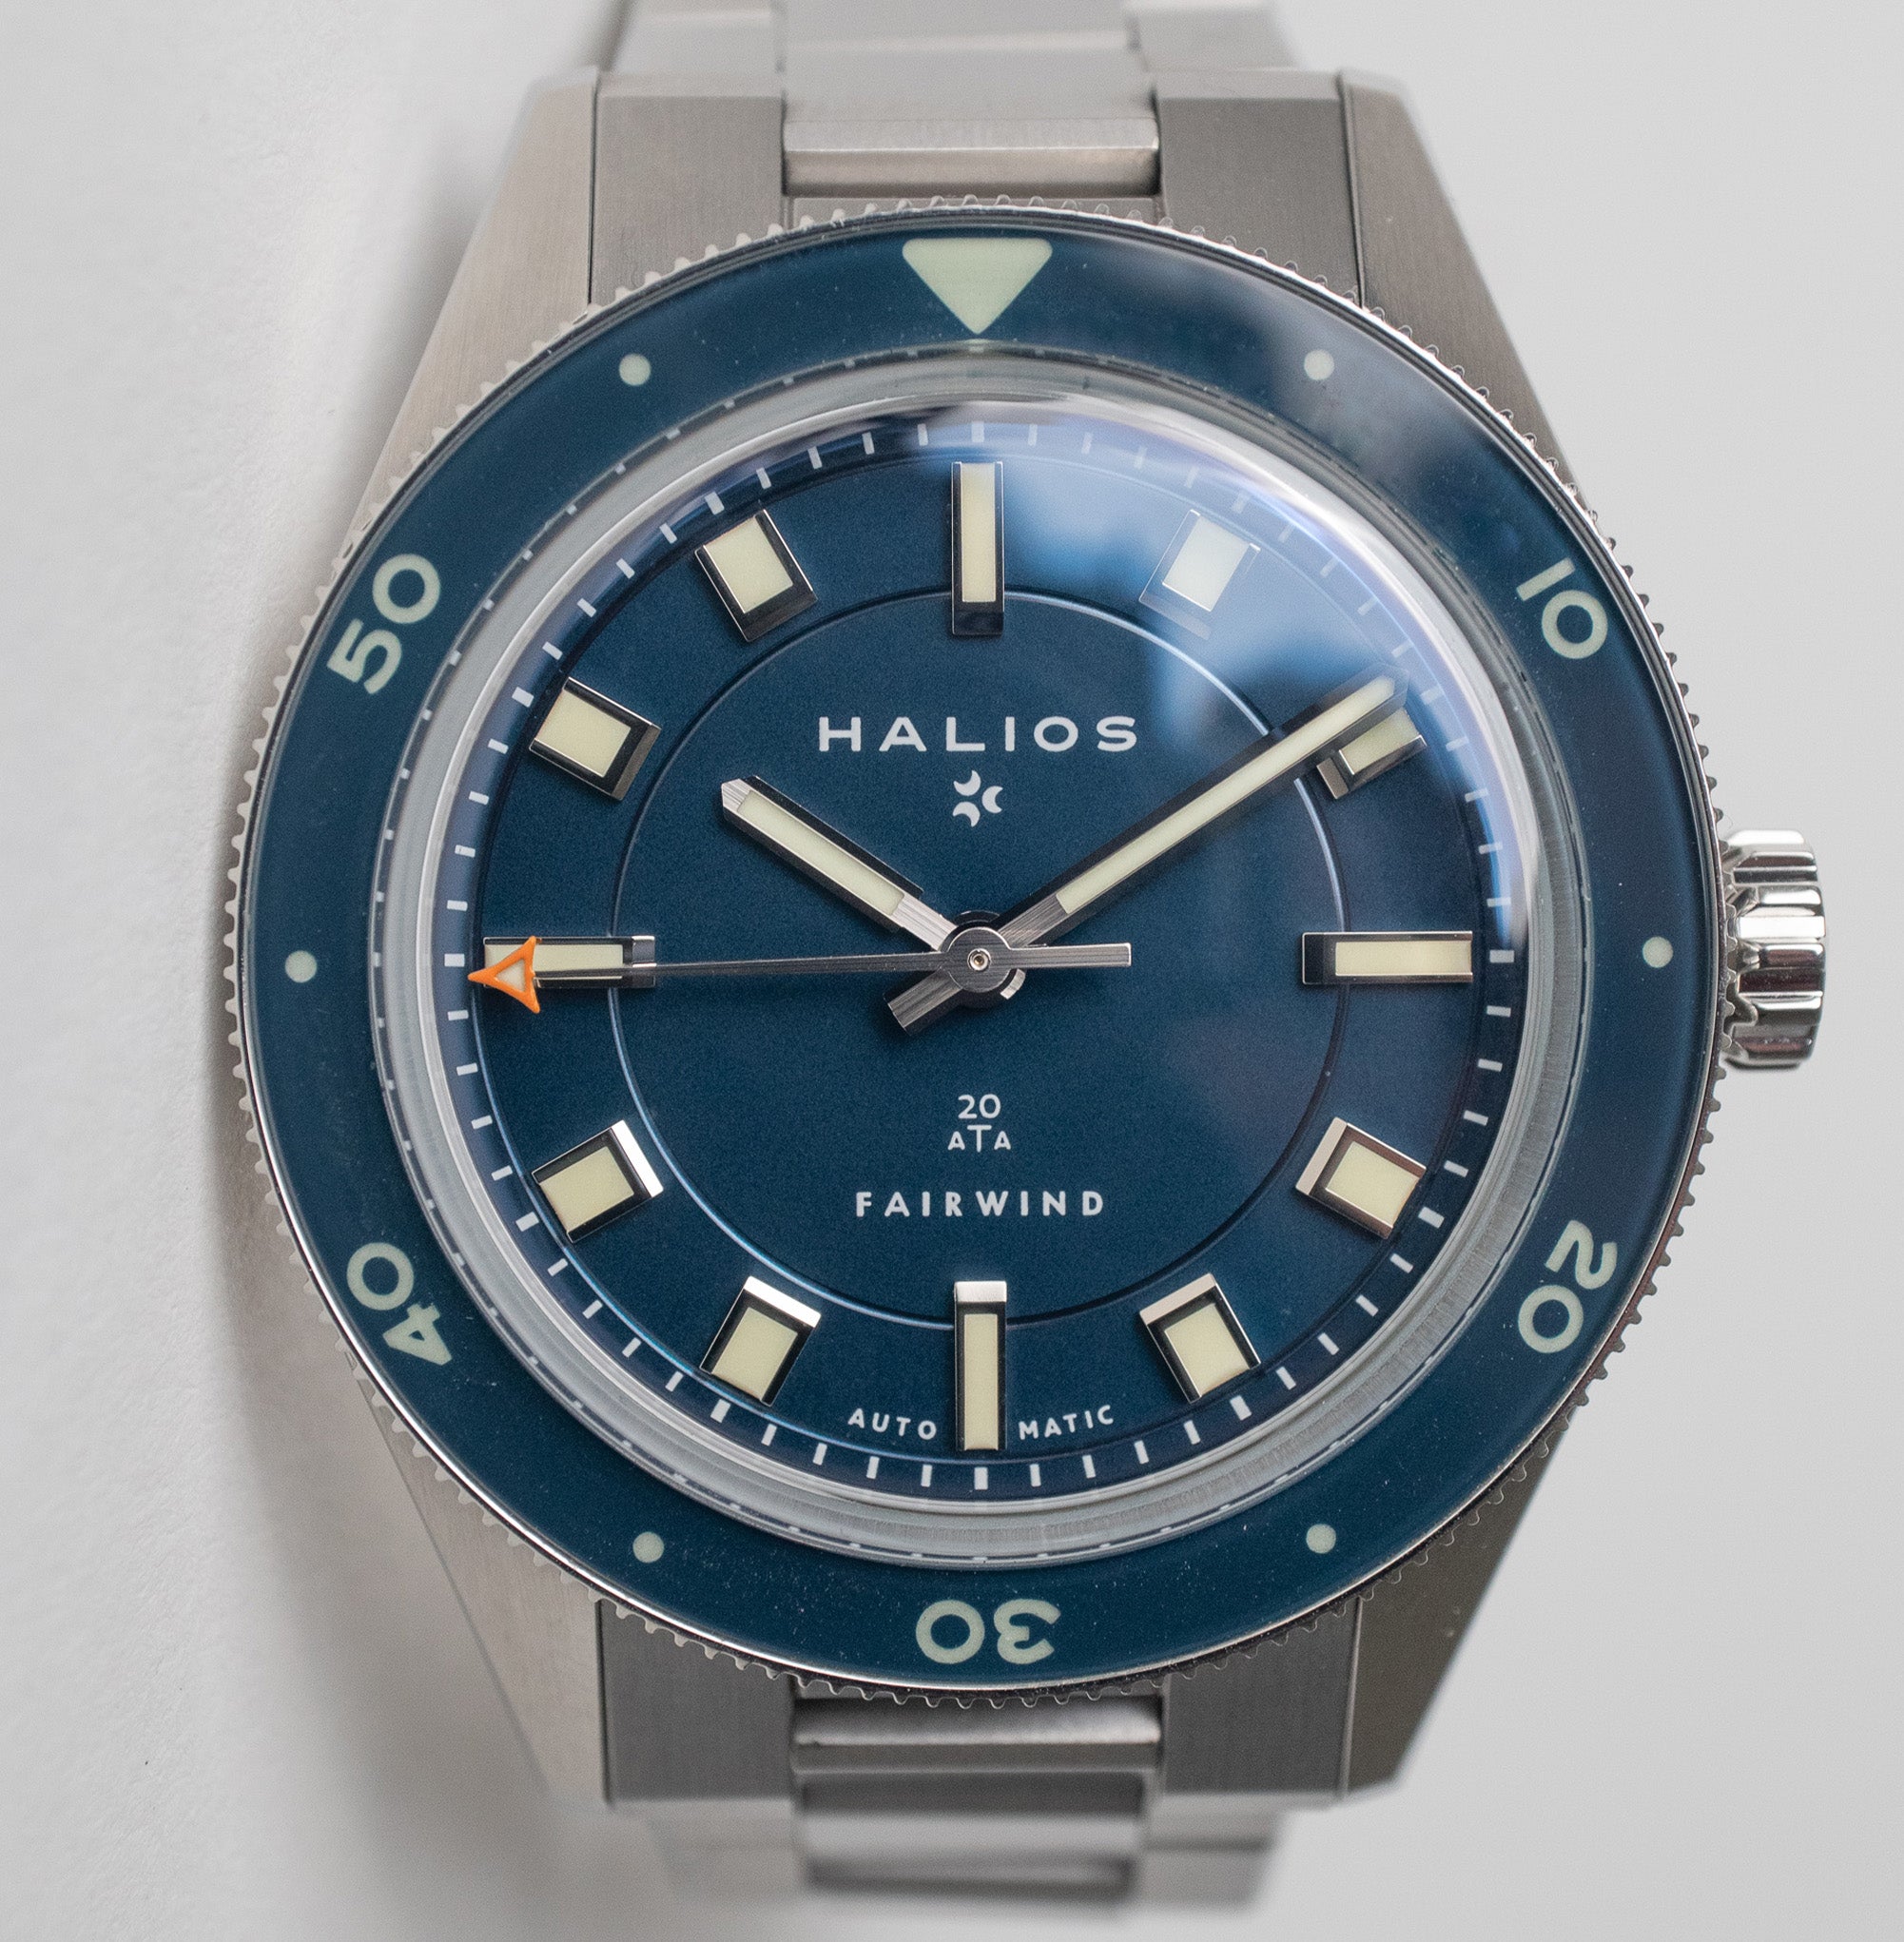 Still The Rolex Of Microbrands? Halios Seaforth IV - YouTube